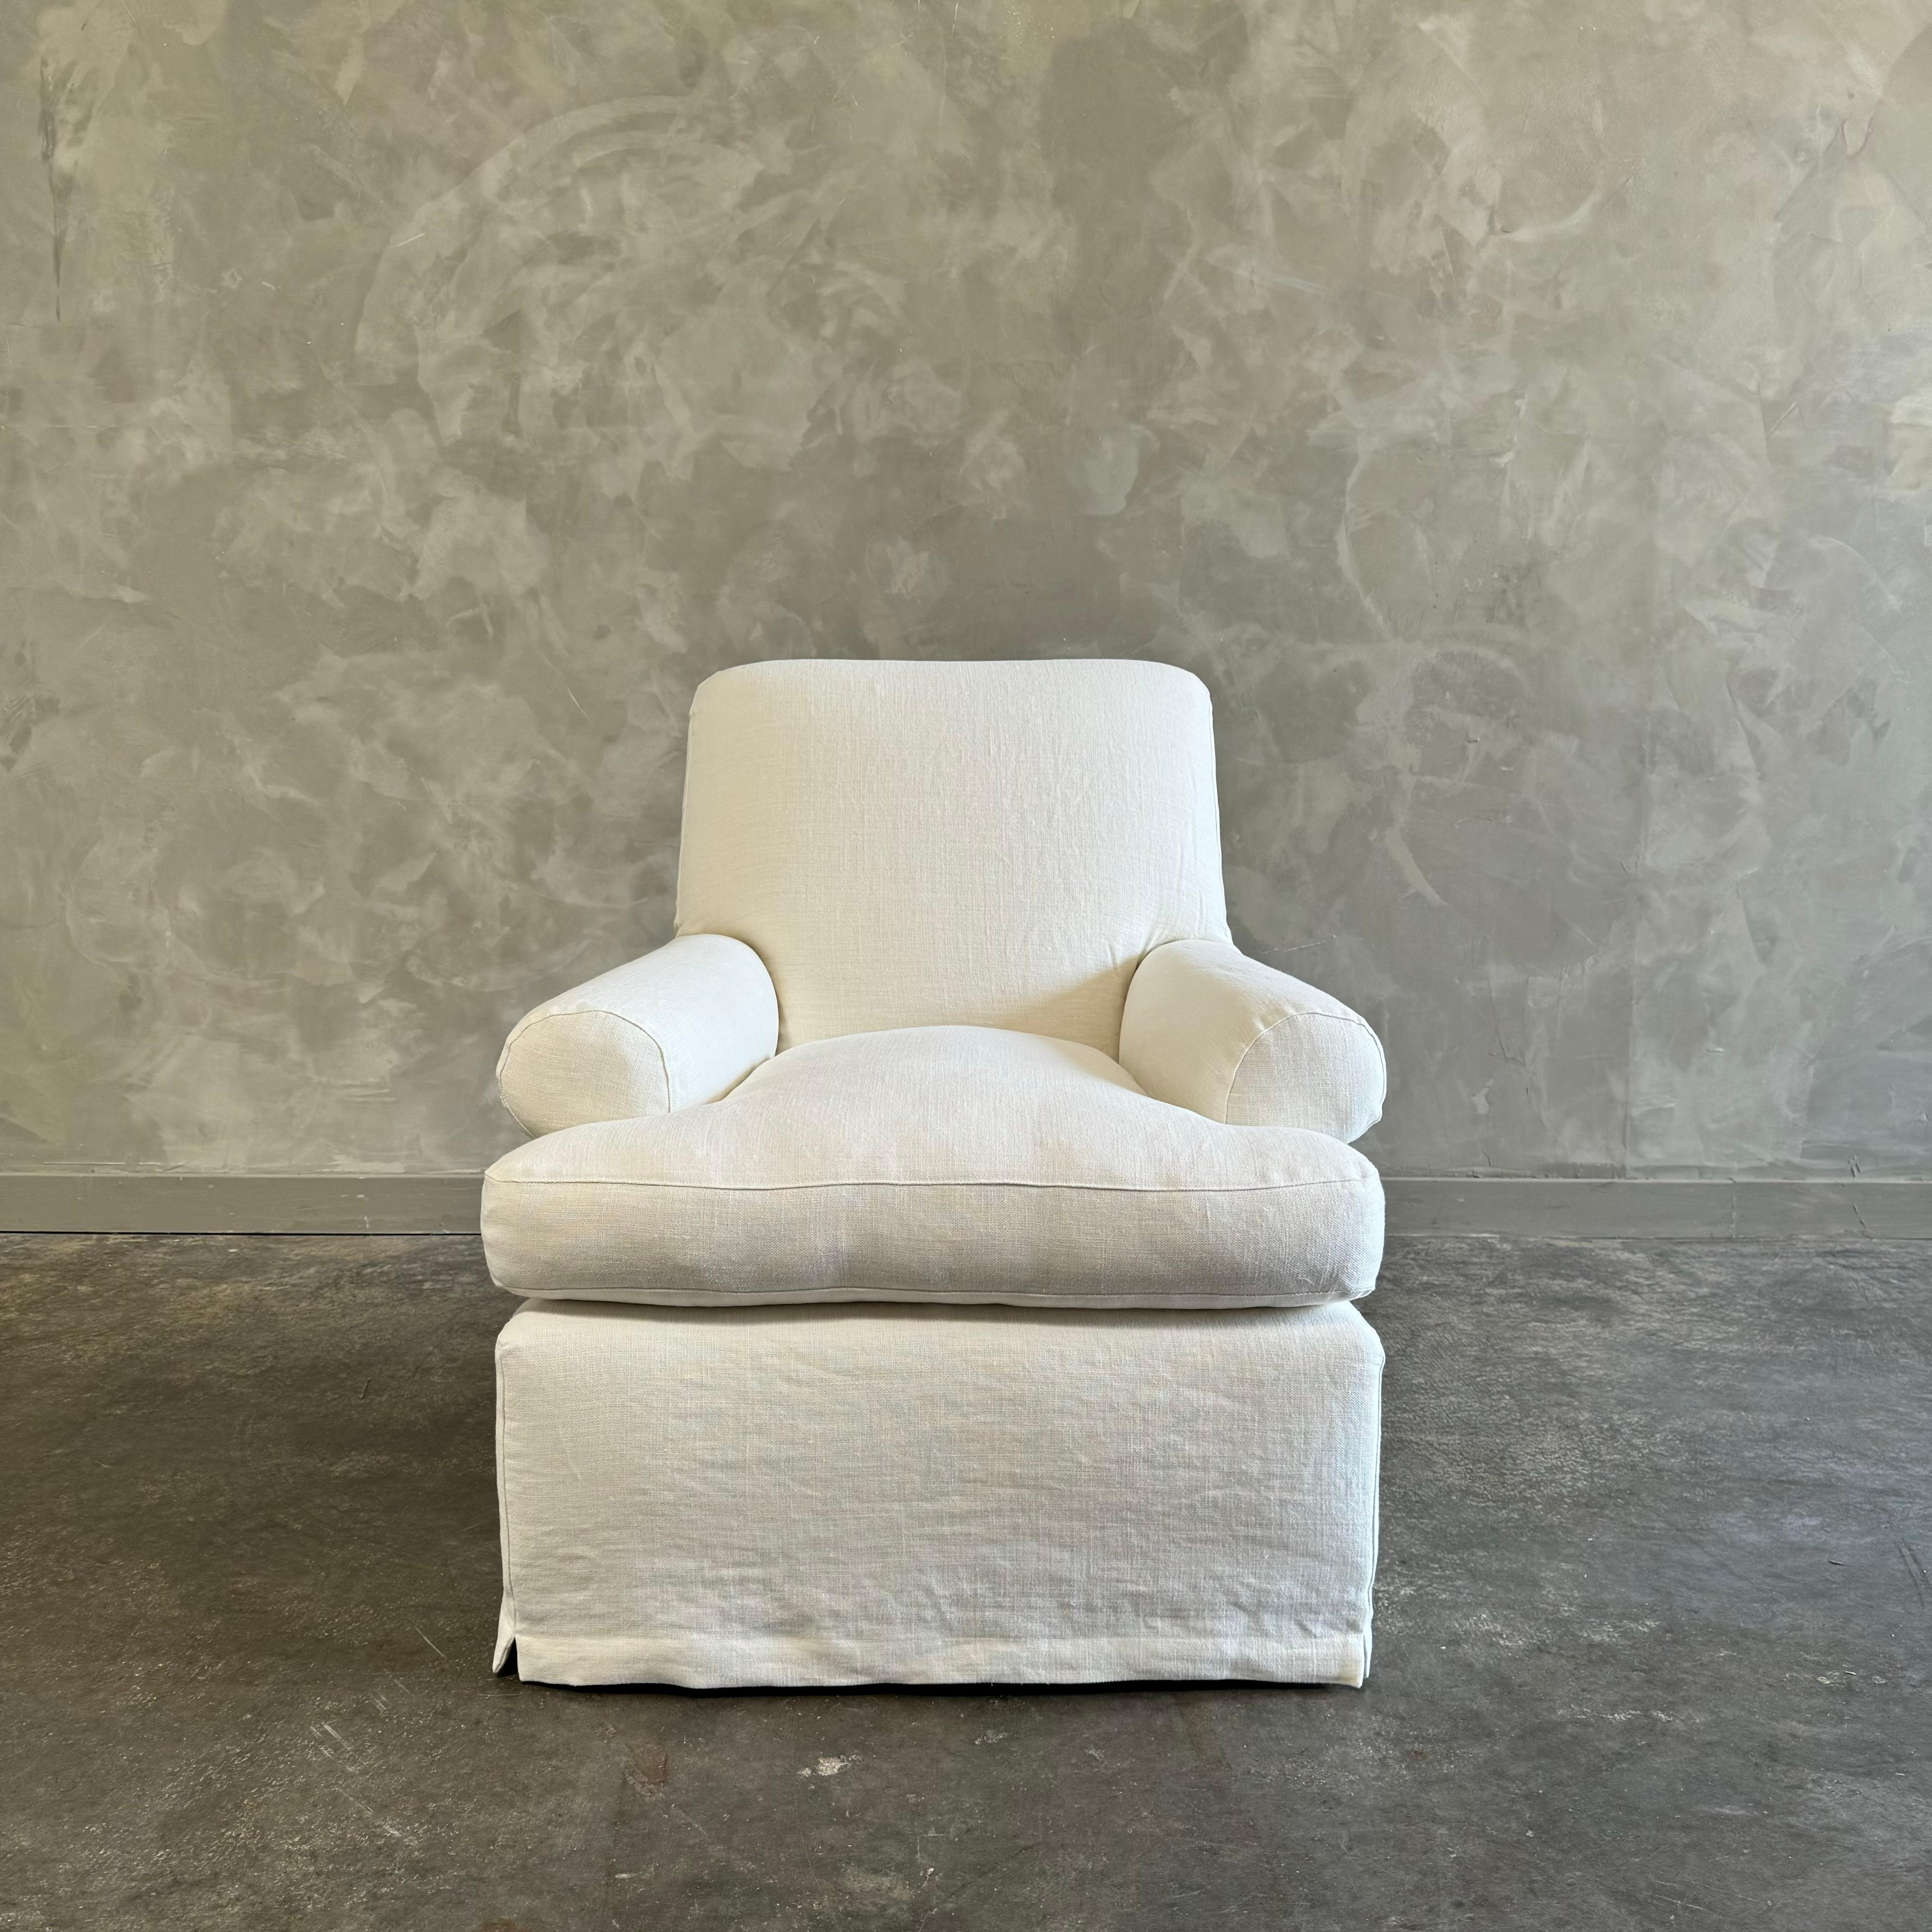 This White Linen Slip-Covered Lounge Chair fits as the perfect accent to any room. It's the perfect chair to have adjacent to a sofa, and can make every pillow look delightful in the room.
Slip cover made out of 100% natural Belgian Linen. 
Seat is